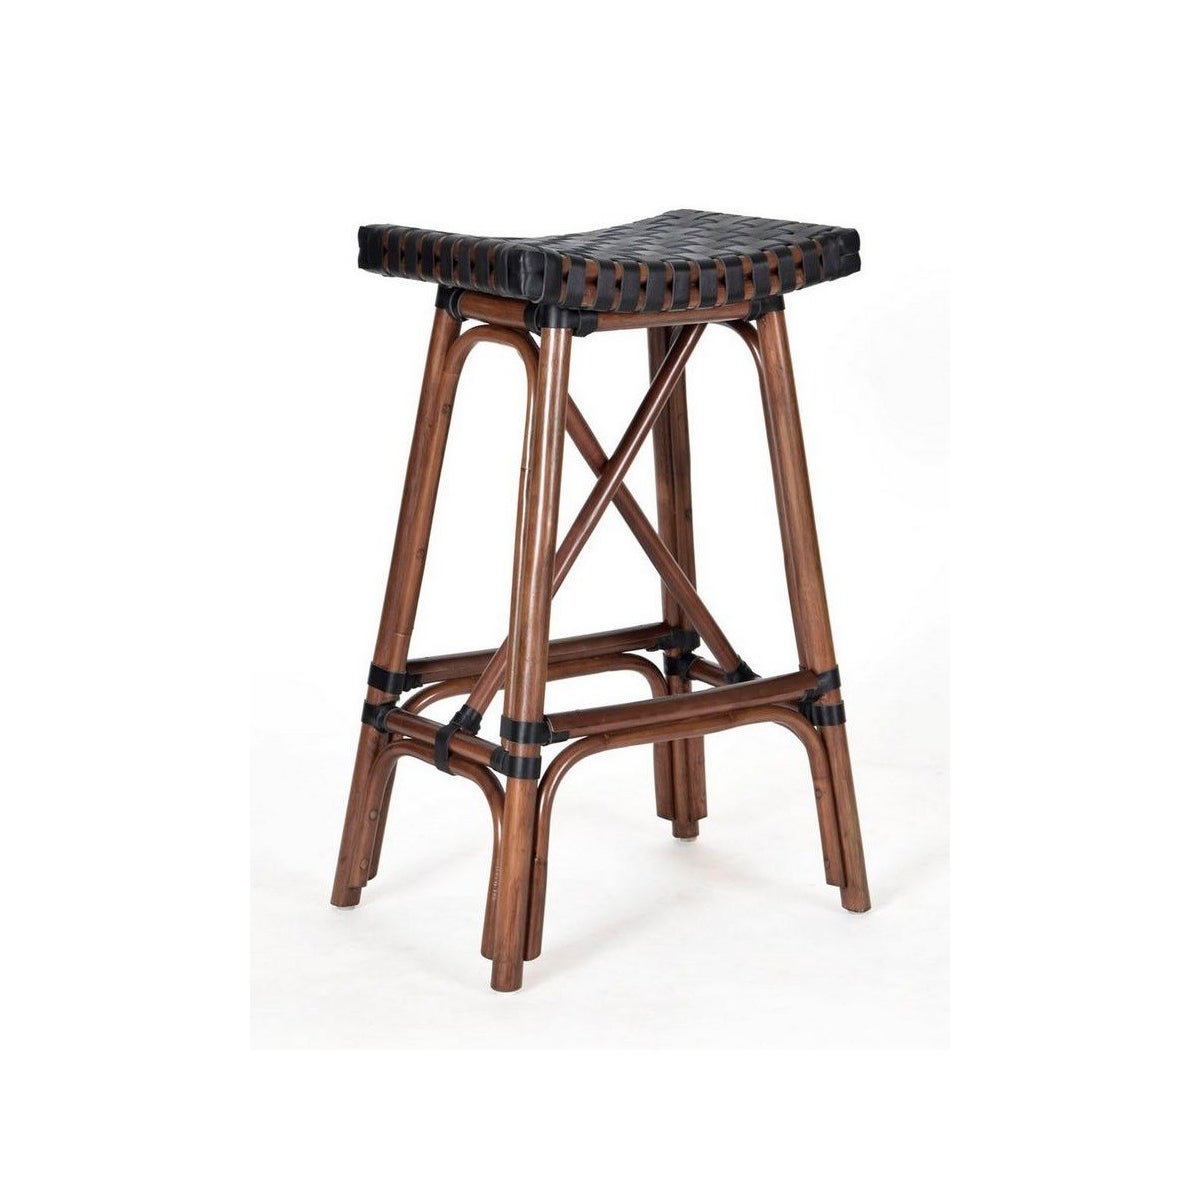 CLOSE-OUT!!Malibu Counter Stool  Frame Color - Cocoa  Leather Color - Black 50% OFF!Item to be